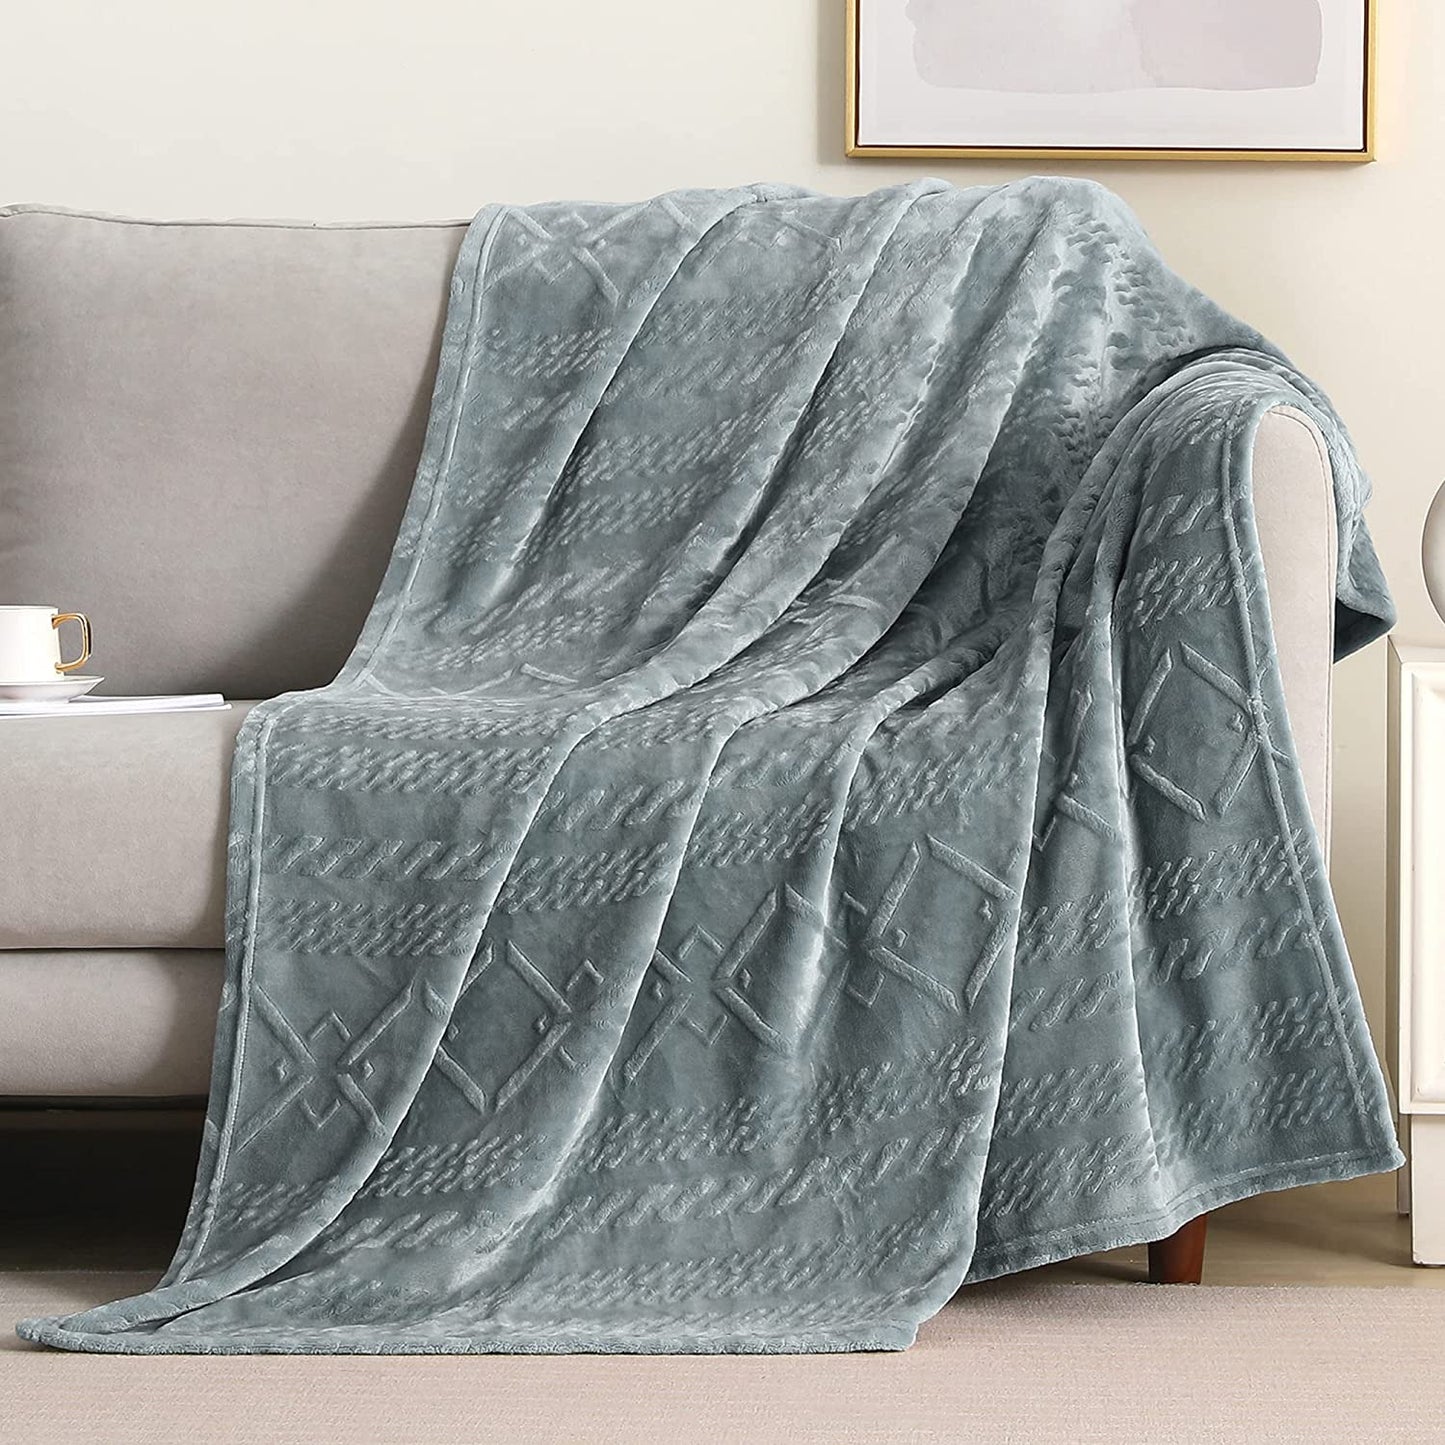 Exclusivo Mezcla Soft Throw Blanket, Large Fuzzy Fleece Blanket, Decorative Geometry Pattern Plush Throw Blanket for Couch/Sofa/Bed, 50x60 Inches,Silver Grey